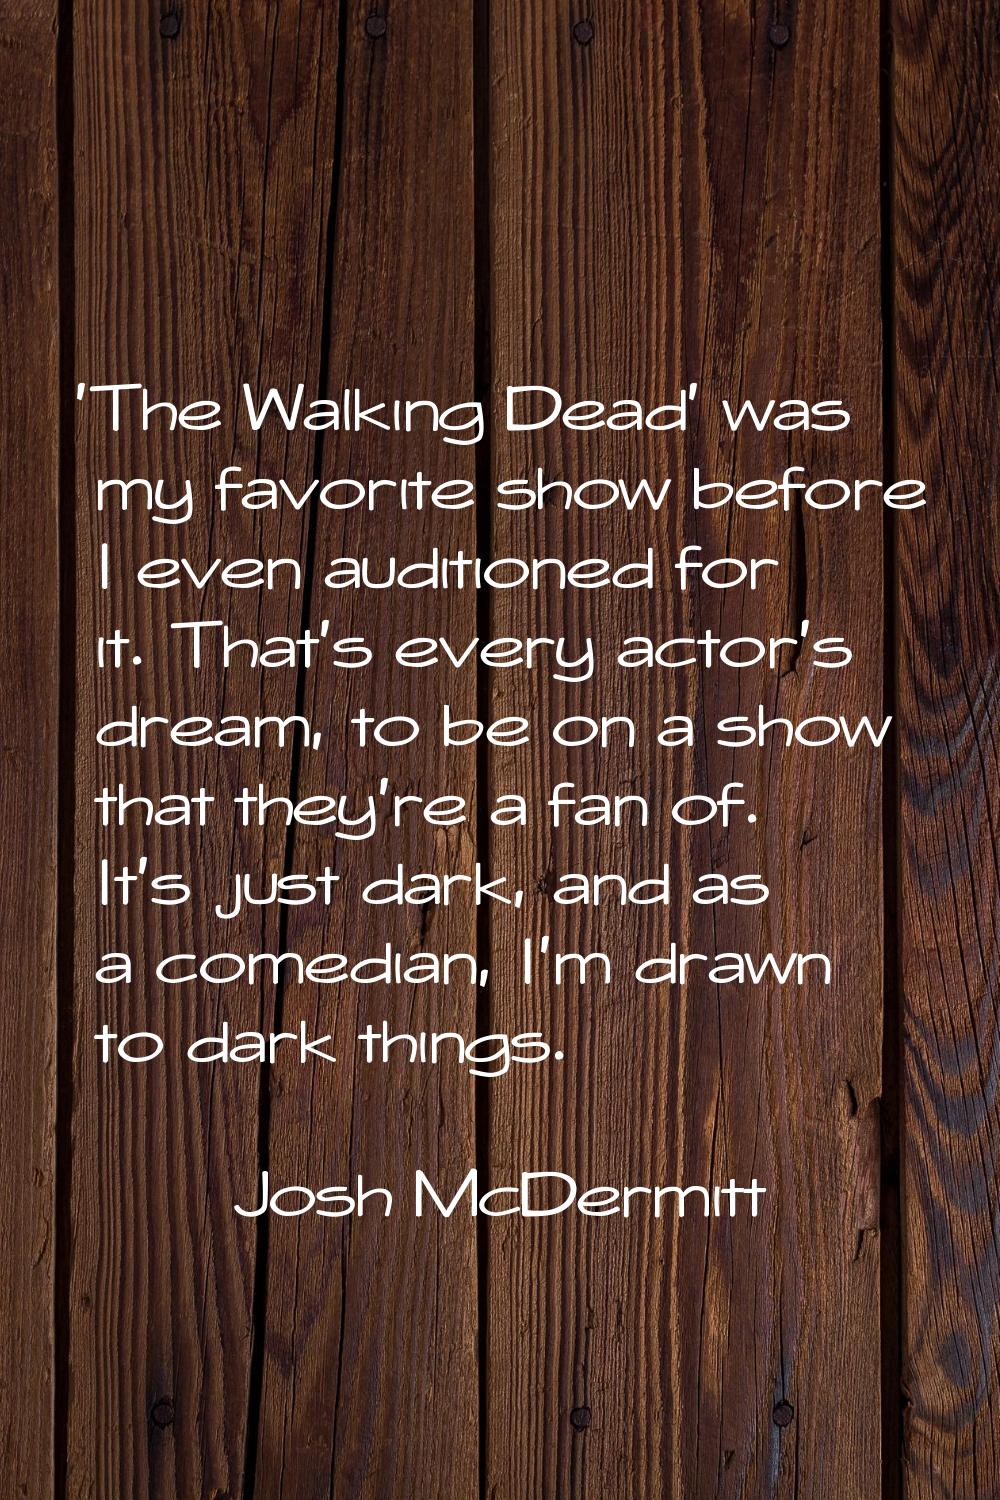 'The Walking Dead' was my favorite show before I even auditioned for it. That's every actor's dream